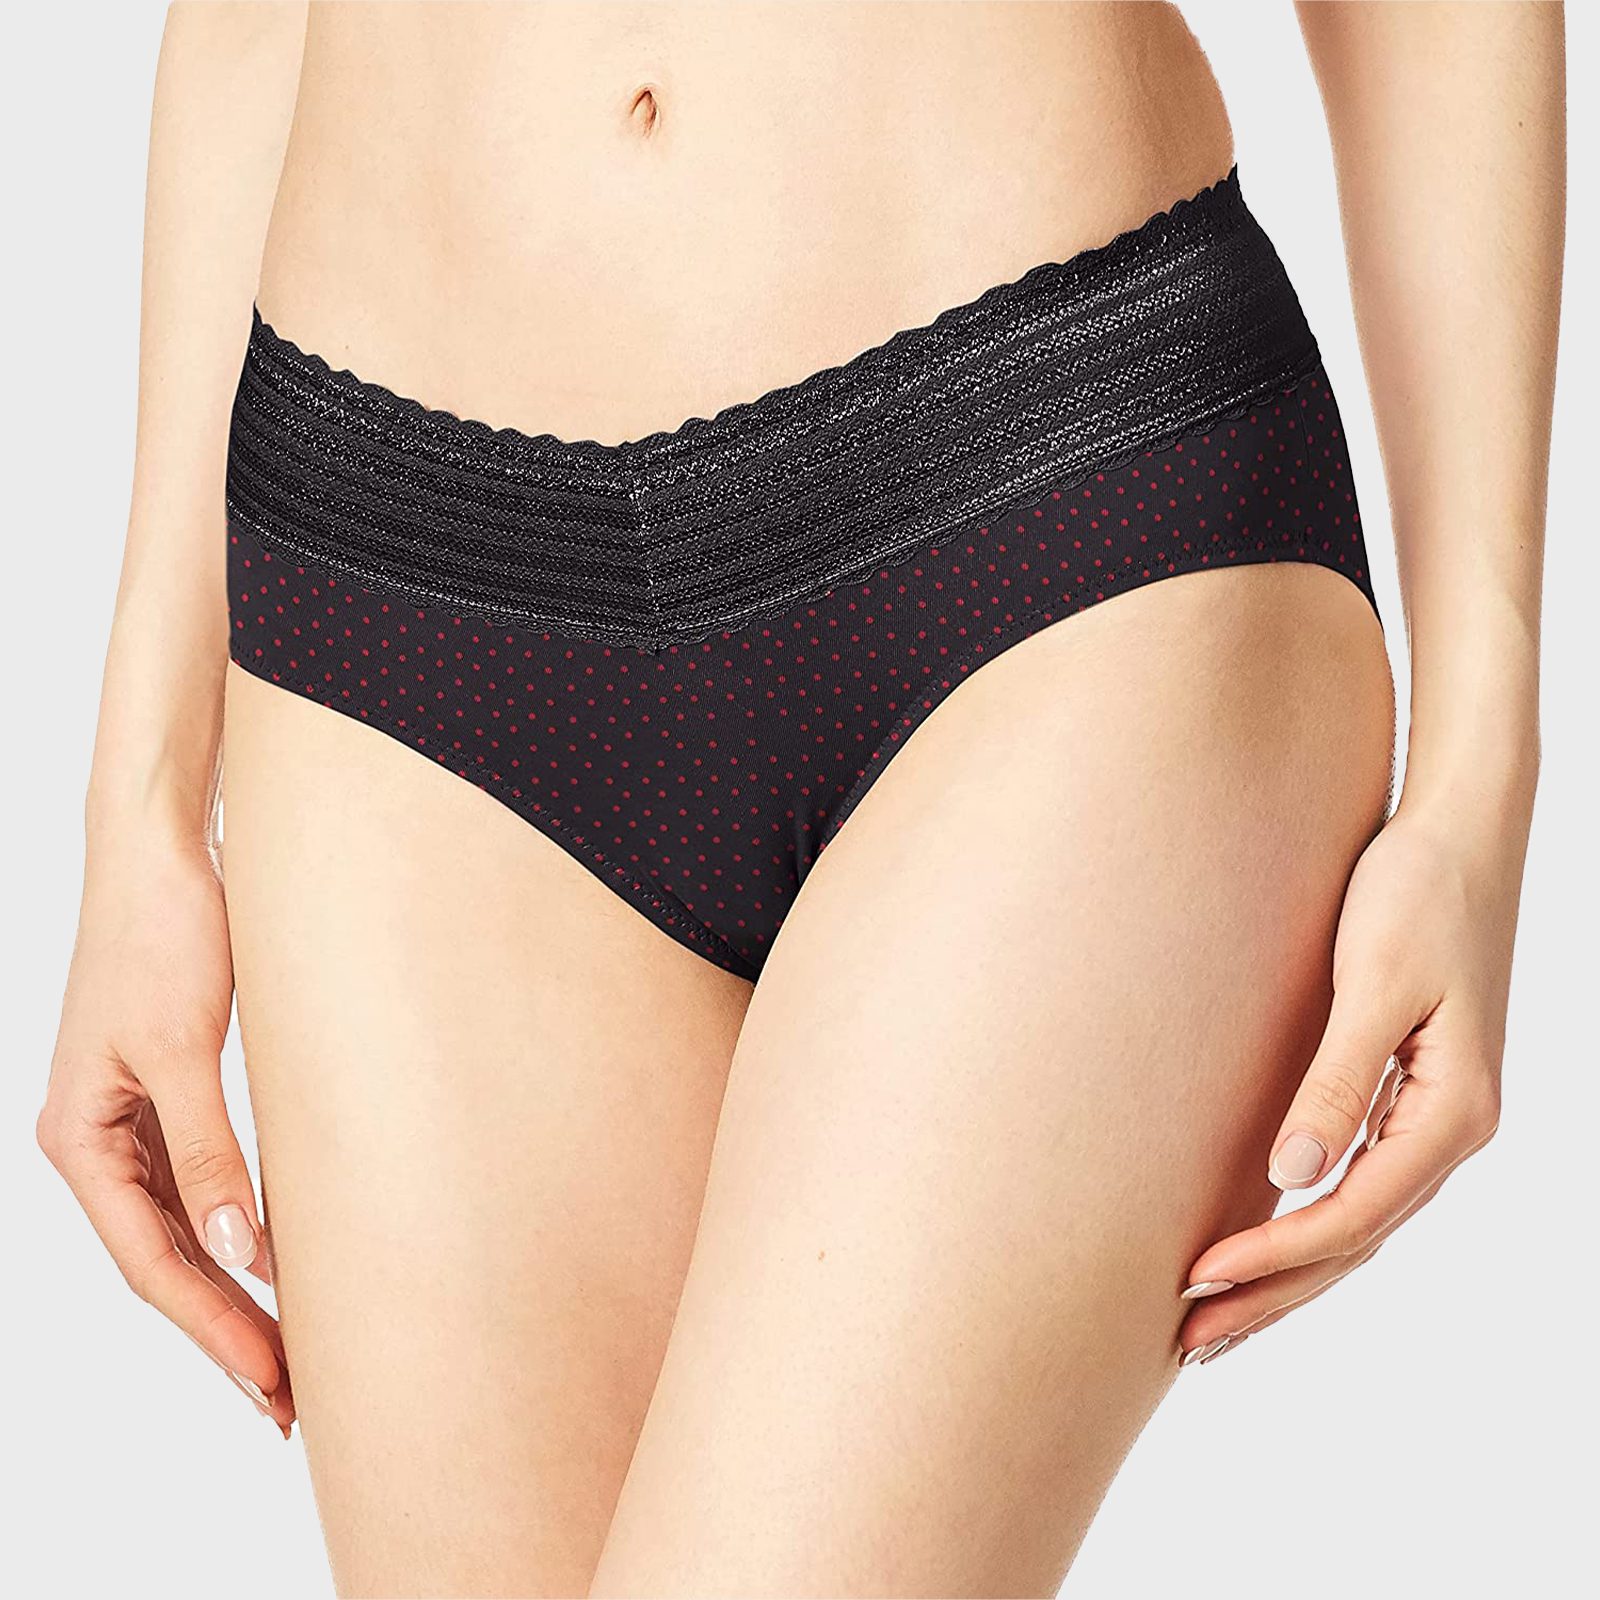 Panty Girdle - The Best Ways To Conquer A Muffin Top